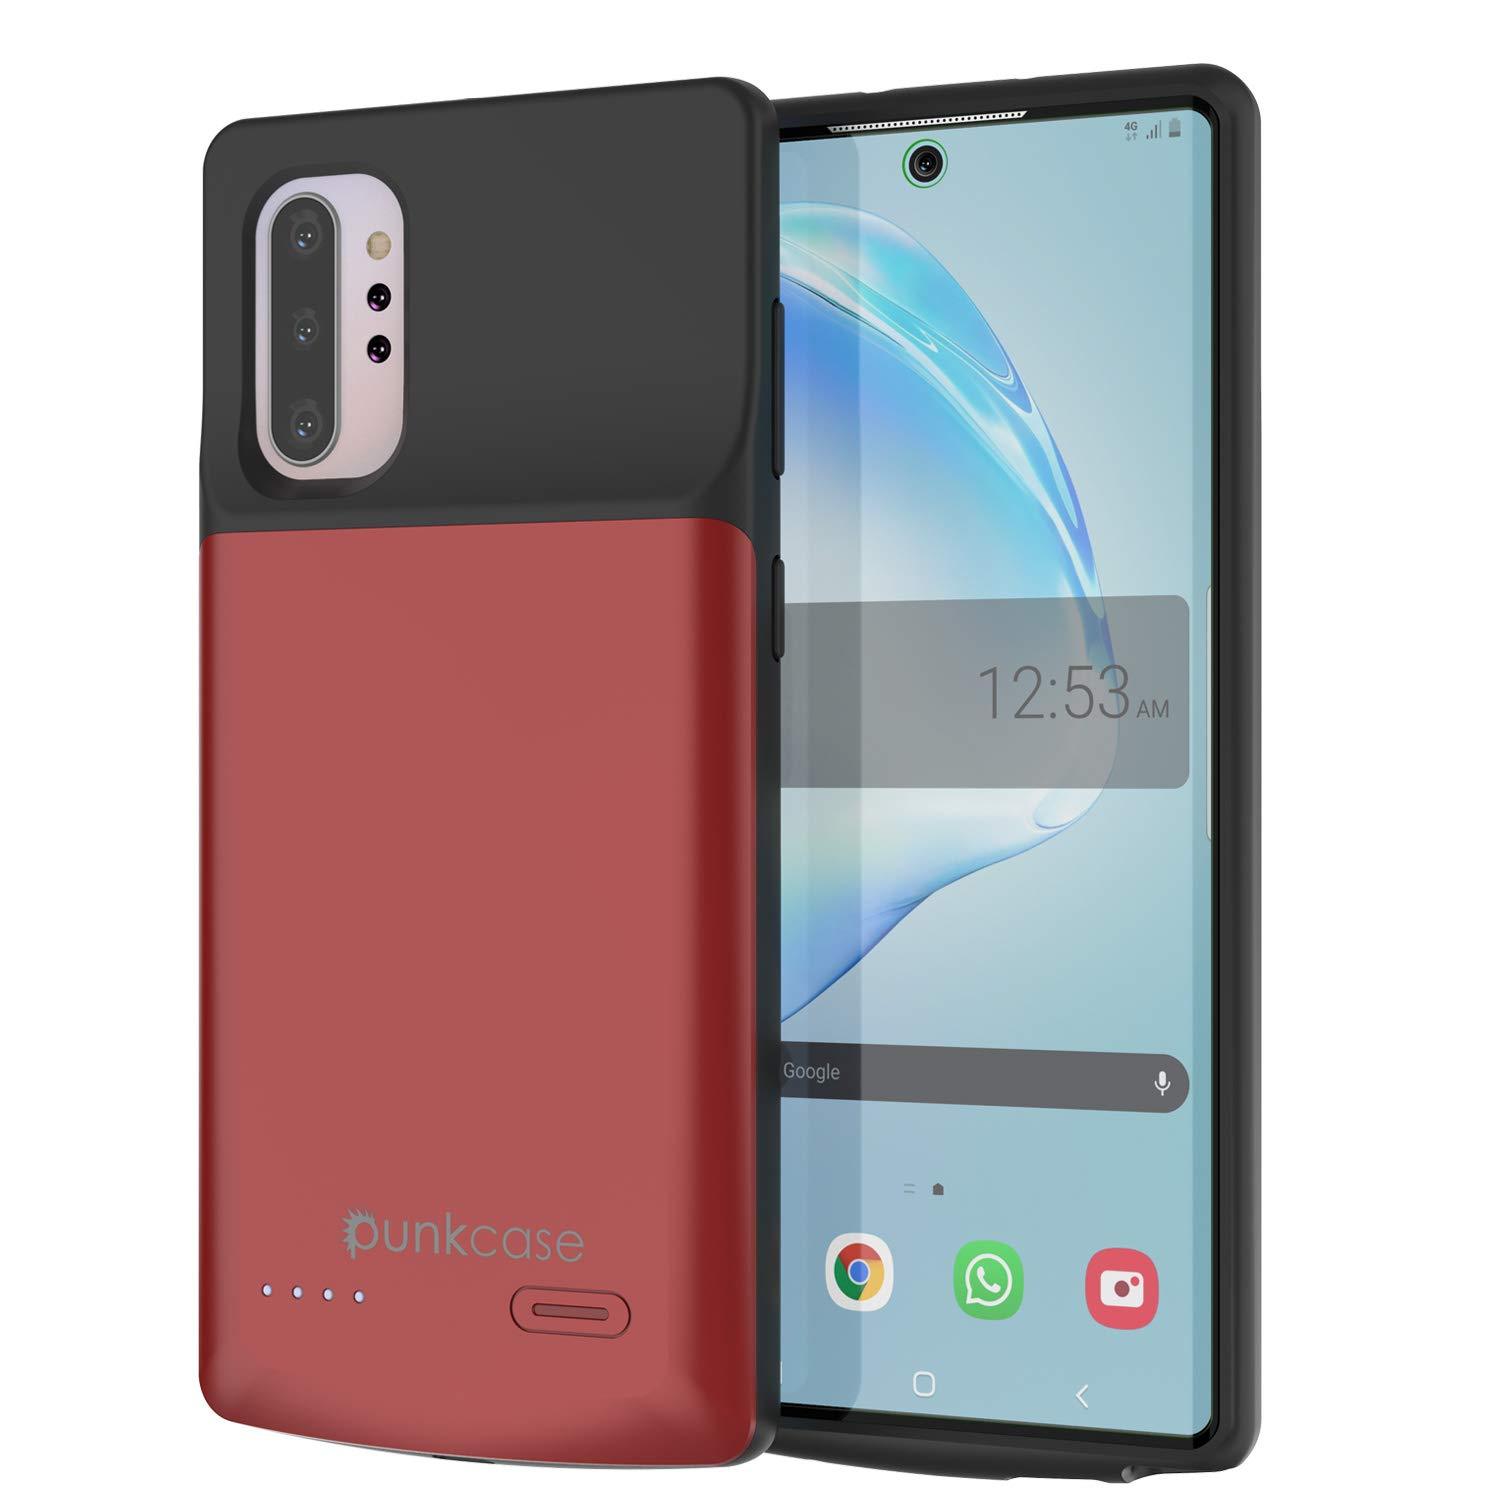 Galaxy Note 10+ Plus 6000mAH Battery Charger W/ USB Port Slim Case [Red] (Color in image: Red)